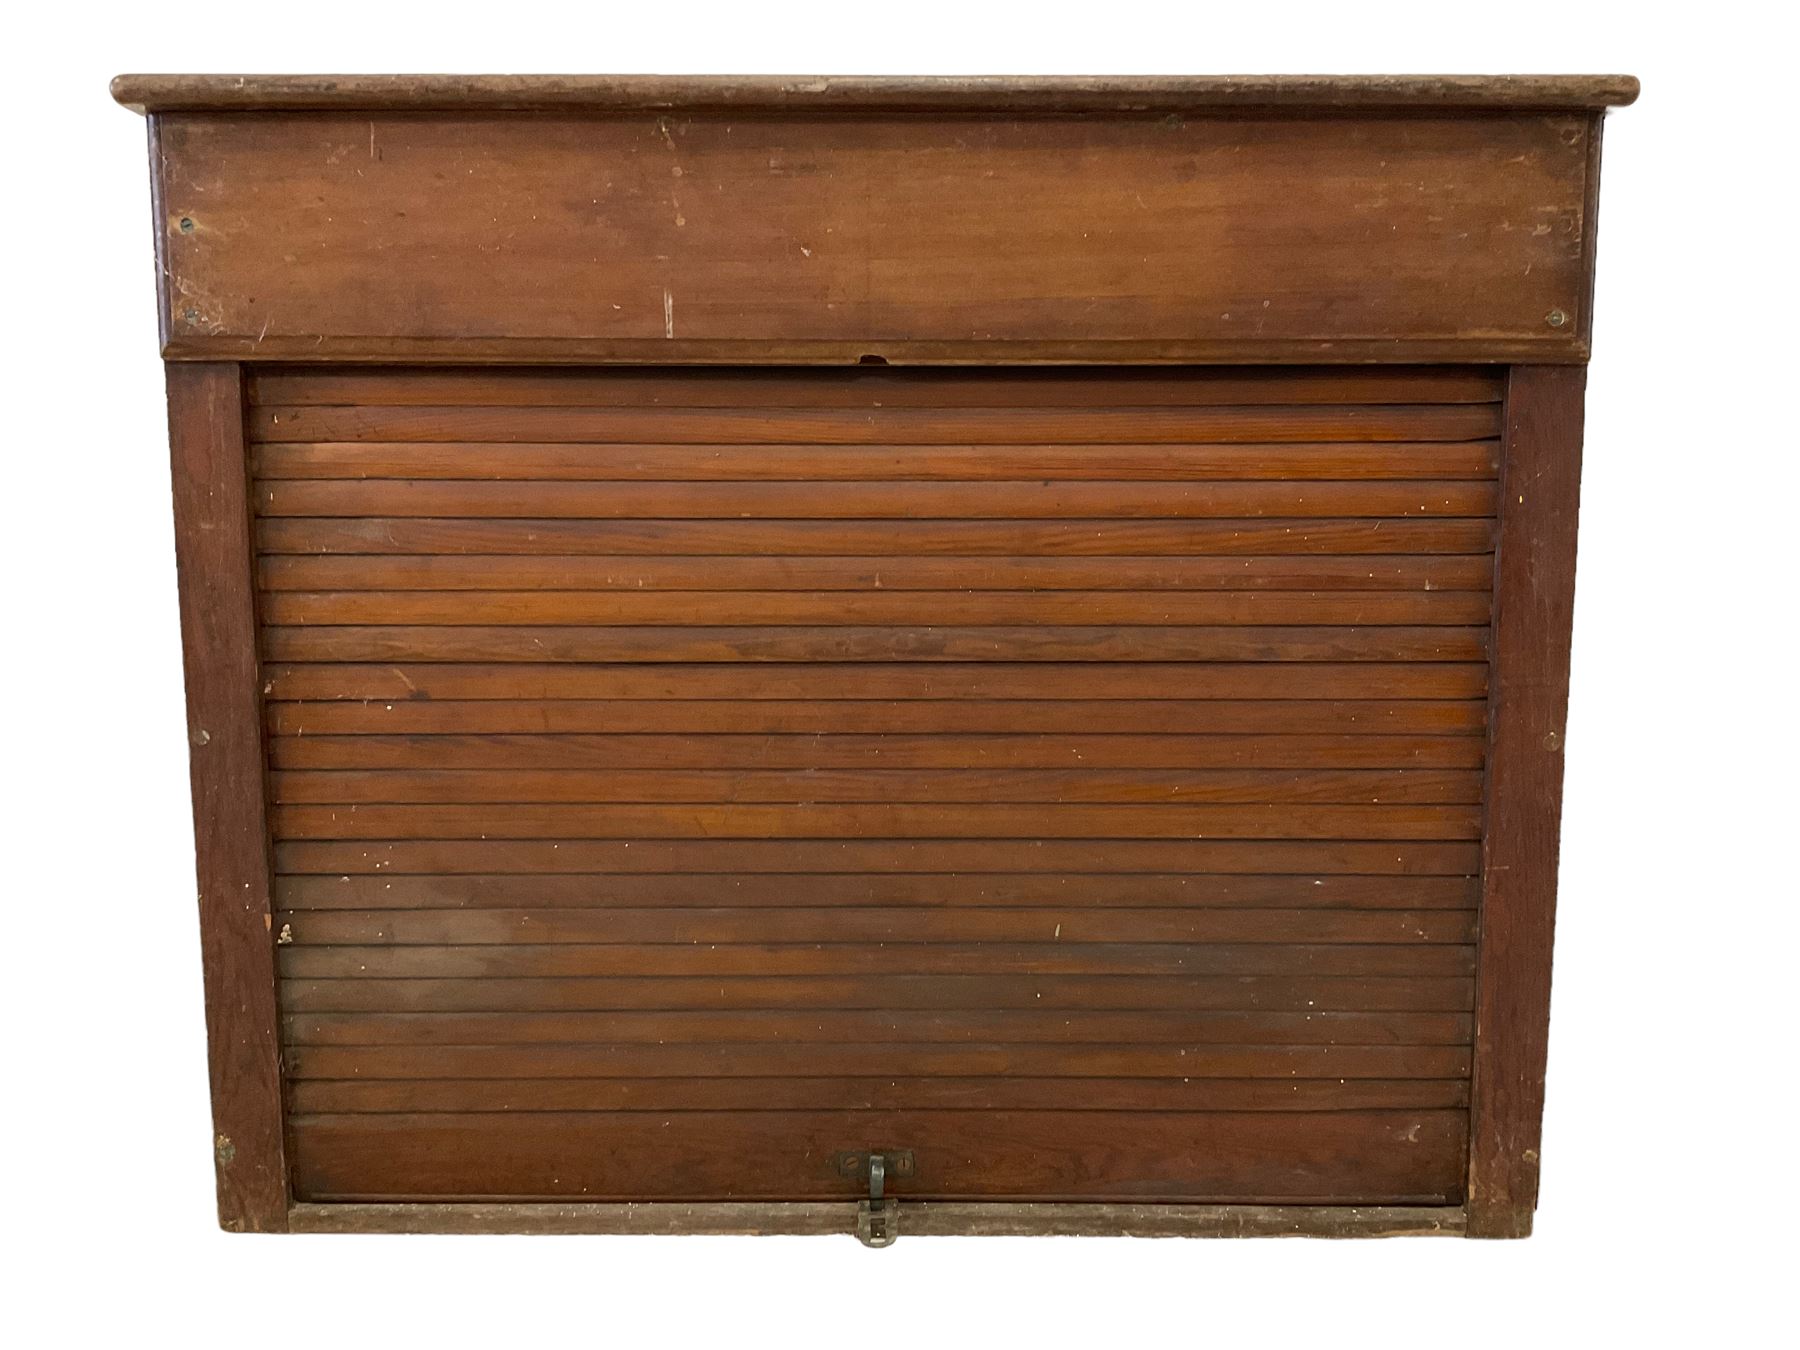 19th century oak hotel or post office pigeonhole cabinet - Image 4 of 6